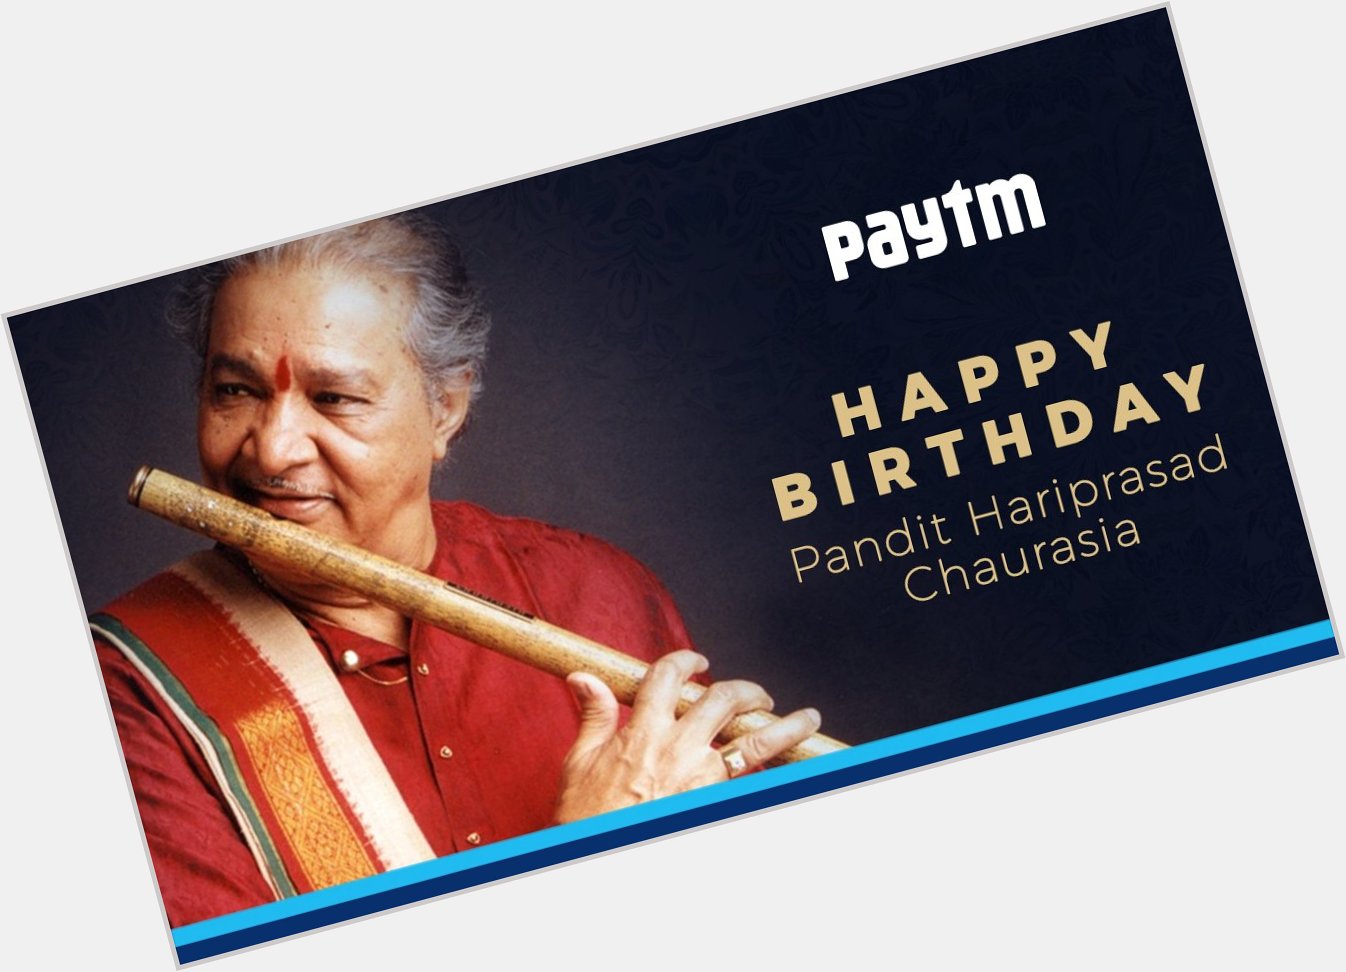 A very Happy Birthday to the musical maestro, Indian classical flautist, Pandit Hariprasad Chaurasia 